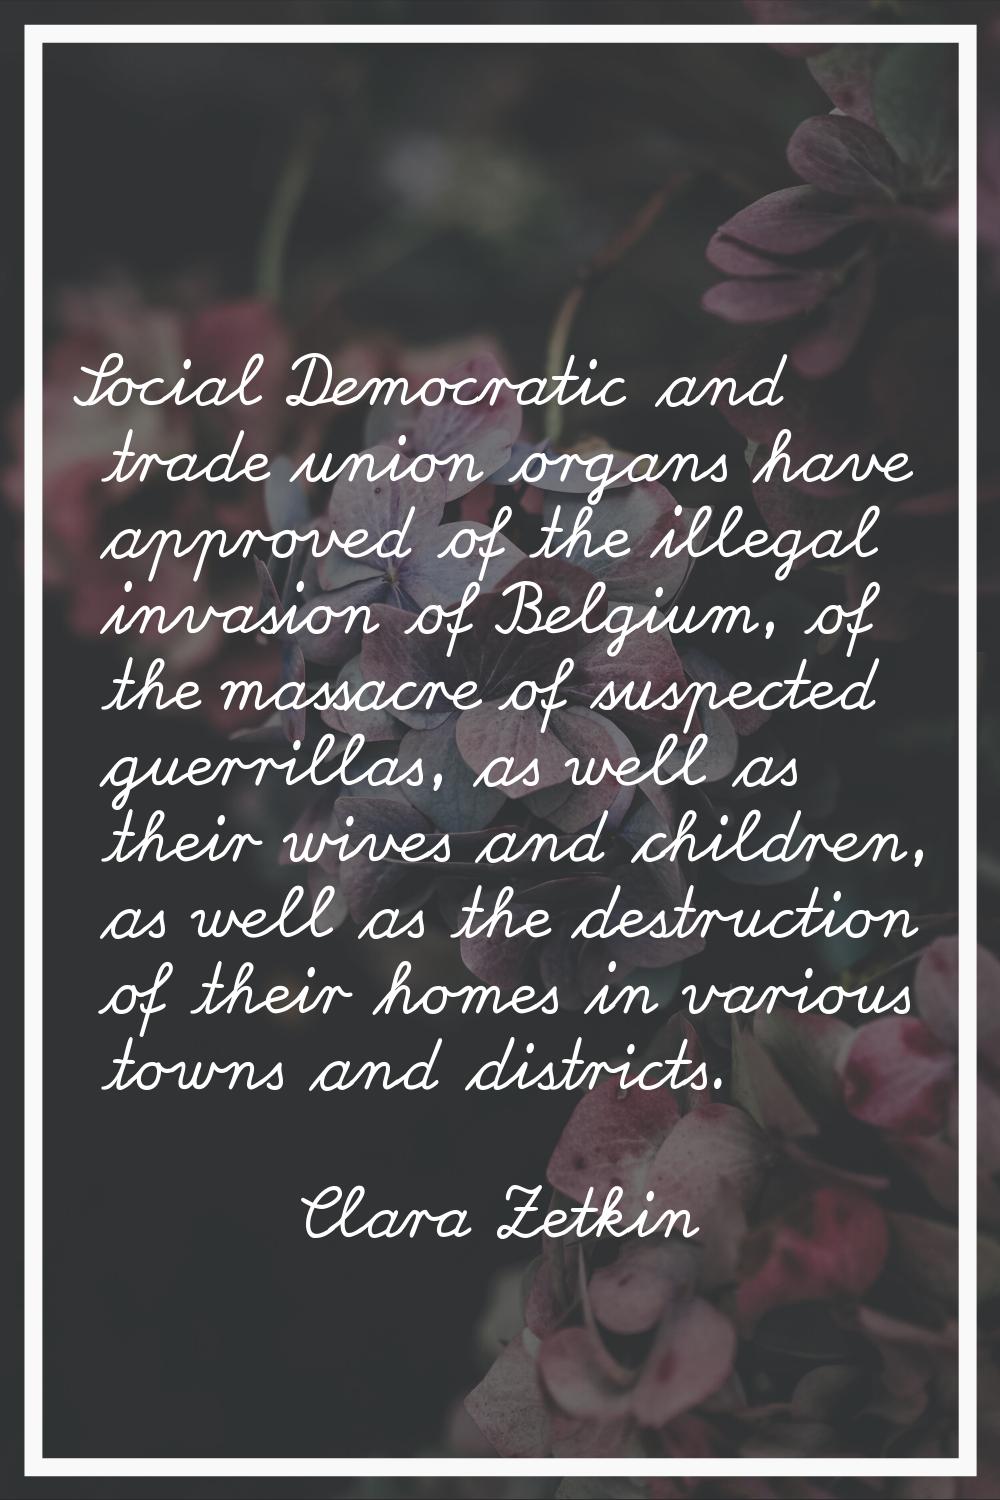 Social Democratic and trade union organs have approved of the illegal invasion of Belgium, of the m